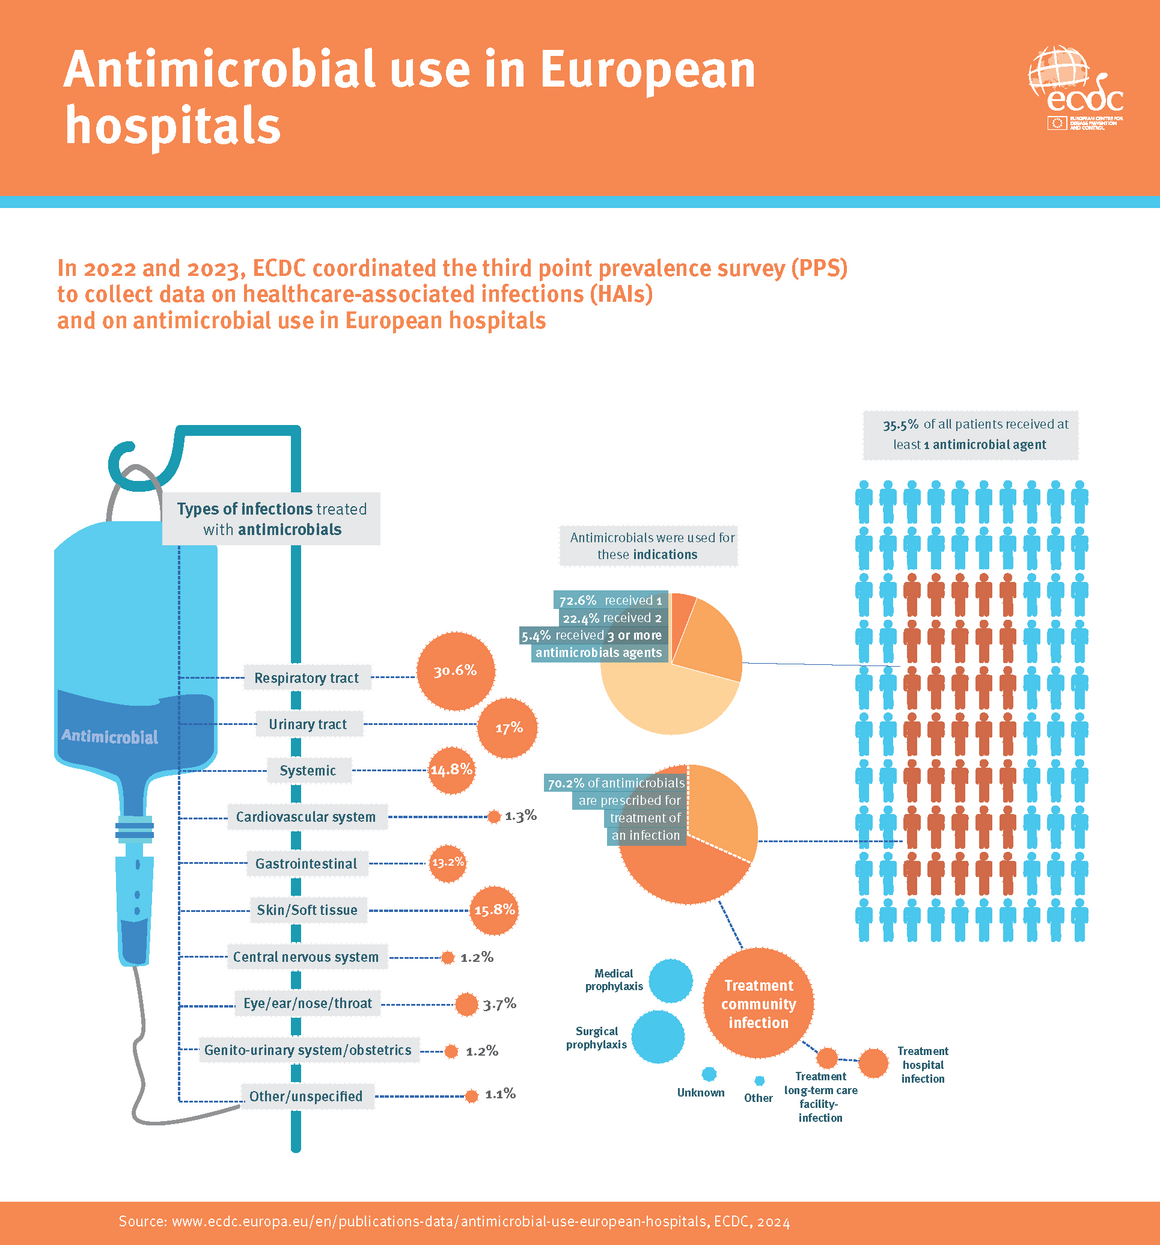 Antimicrobial use hospitals in European hospitals 2022-2023 (infections and antimicrobials)